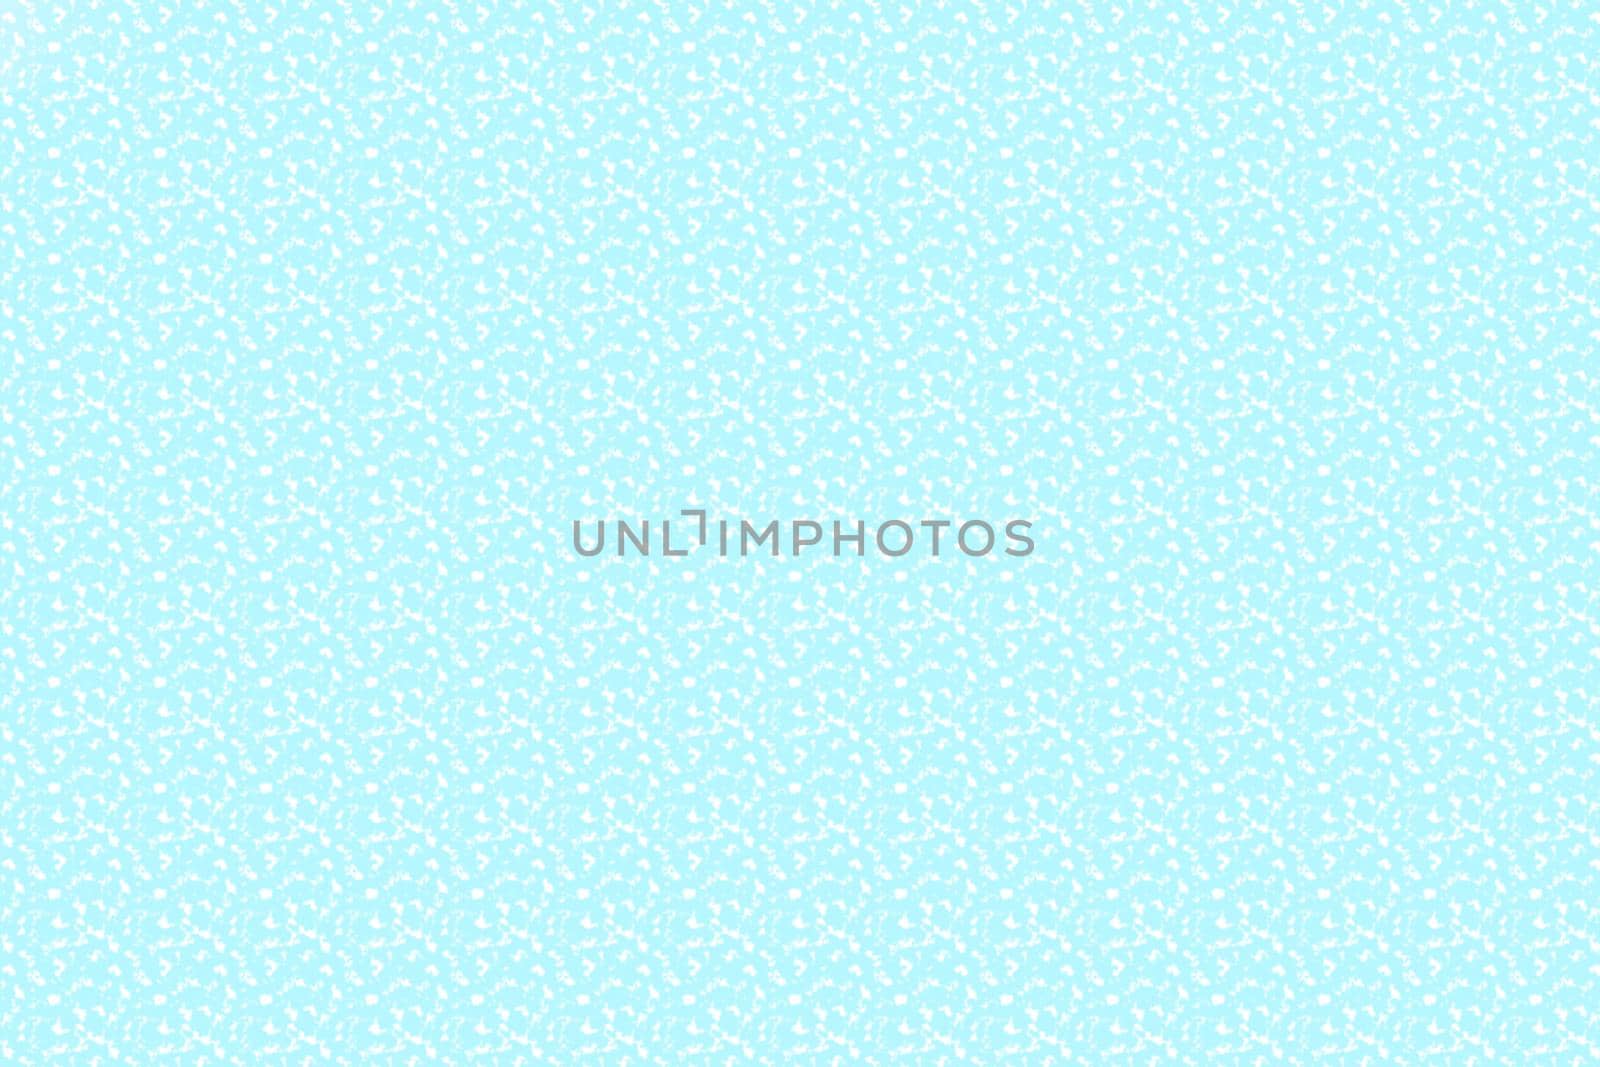 soft white and blue abstract background bitmap illustration by Eldashev